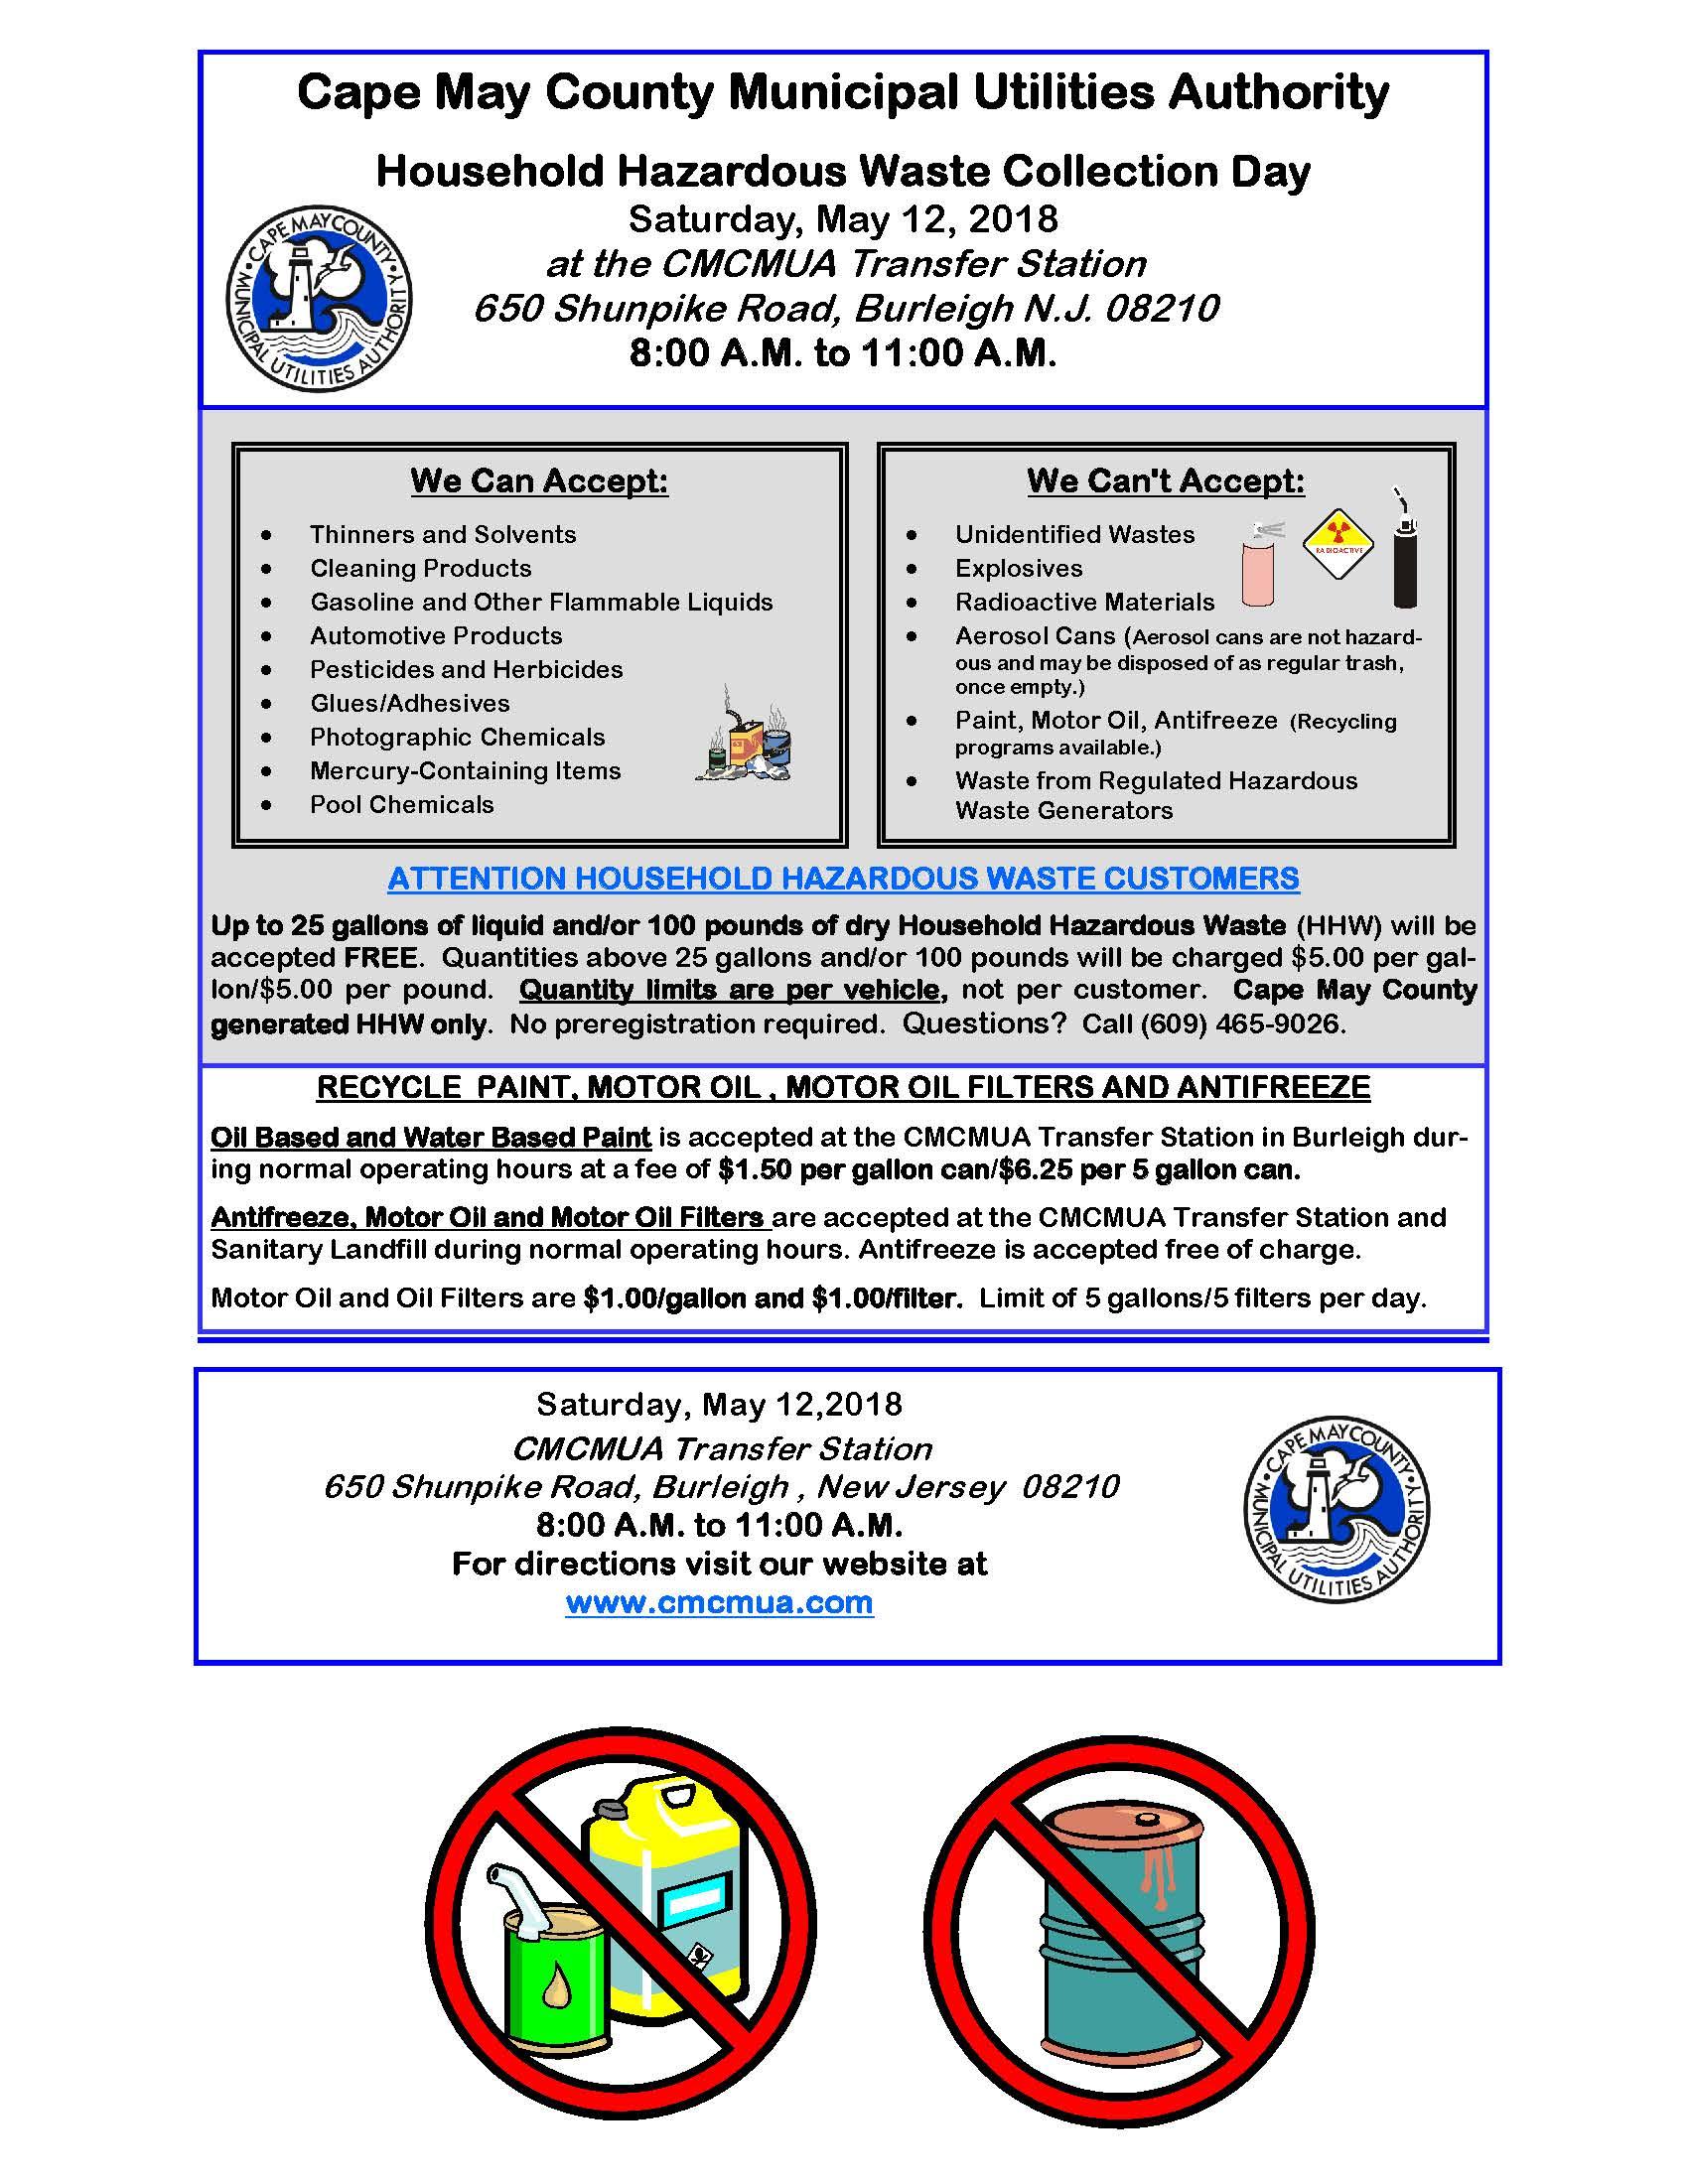 County Hazardous Waste Disposal Day Set for May 12